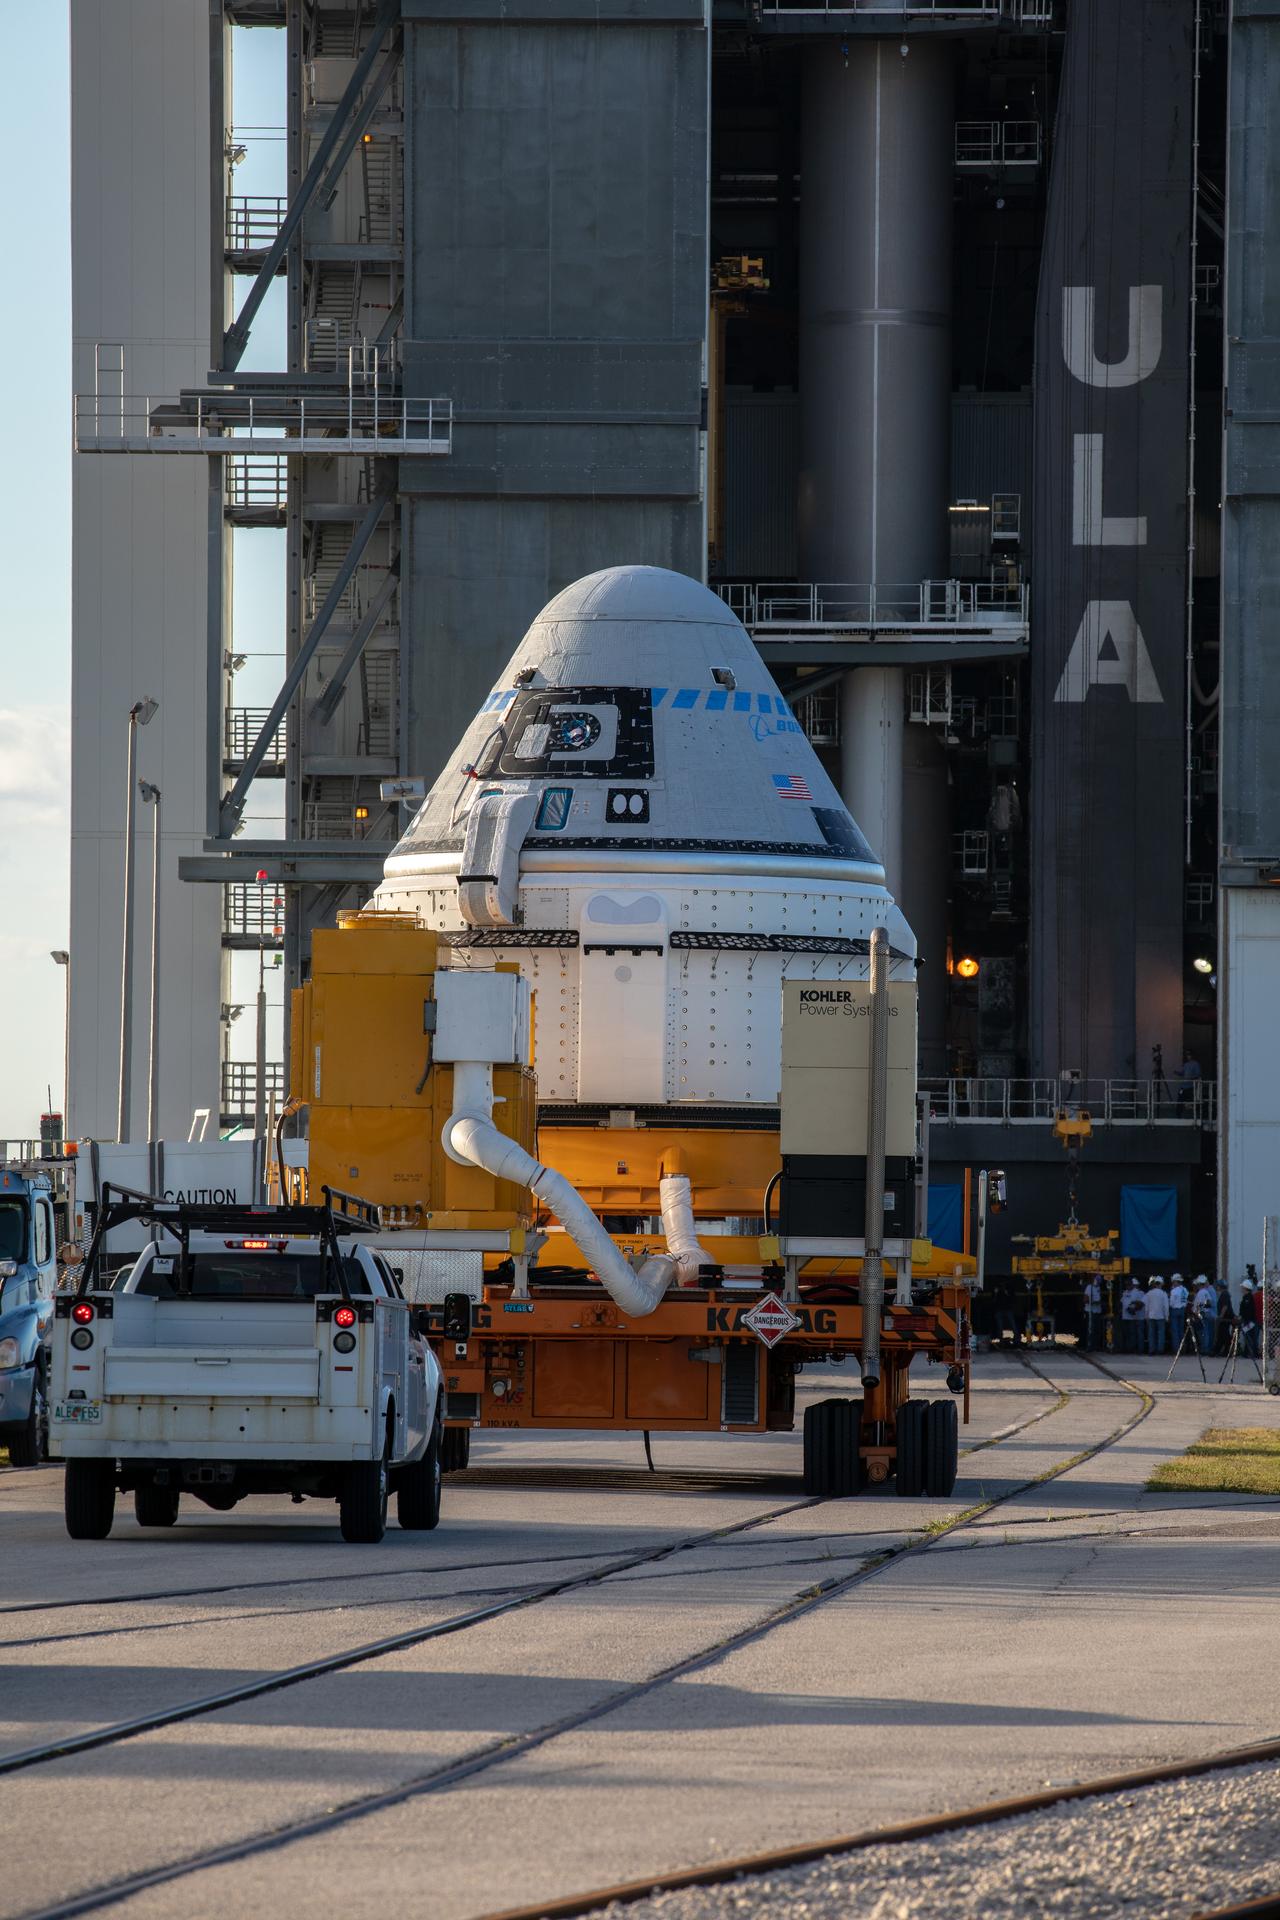 The Boeing CST-100 Starliner spacecraft arrives at the Vertical Integration Facility at Space Launch Complex 41.